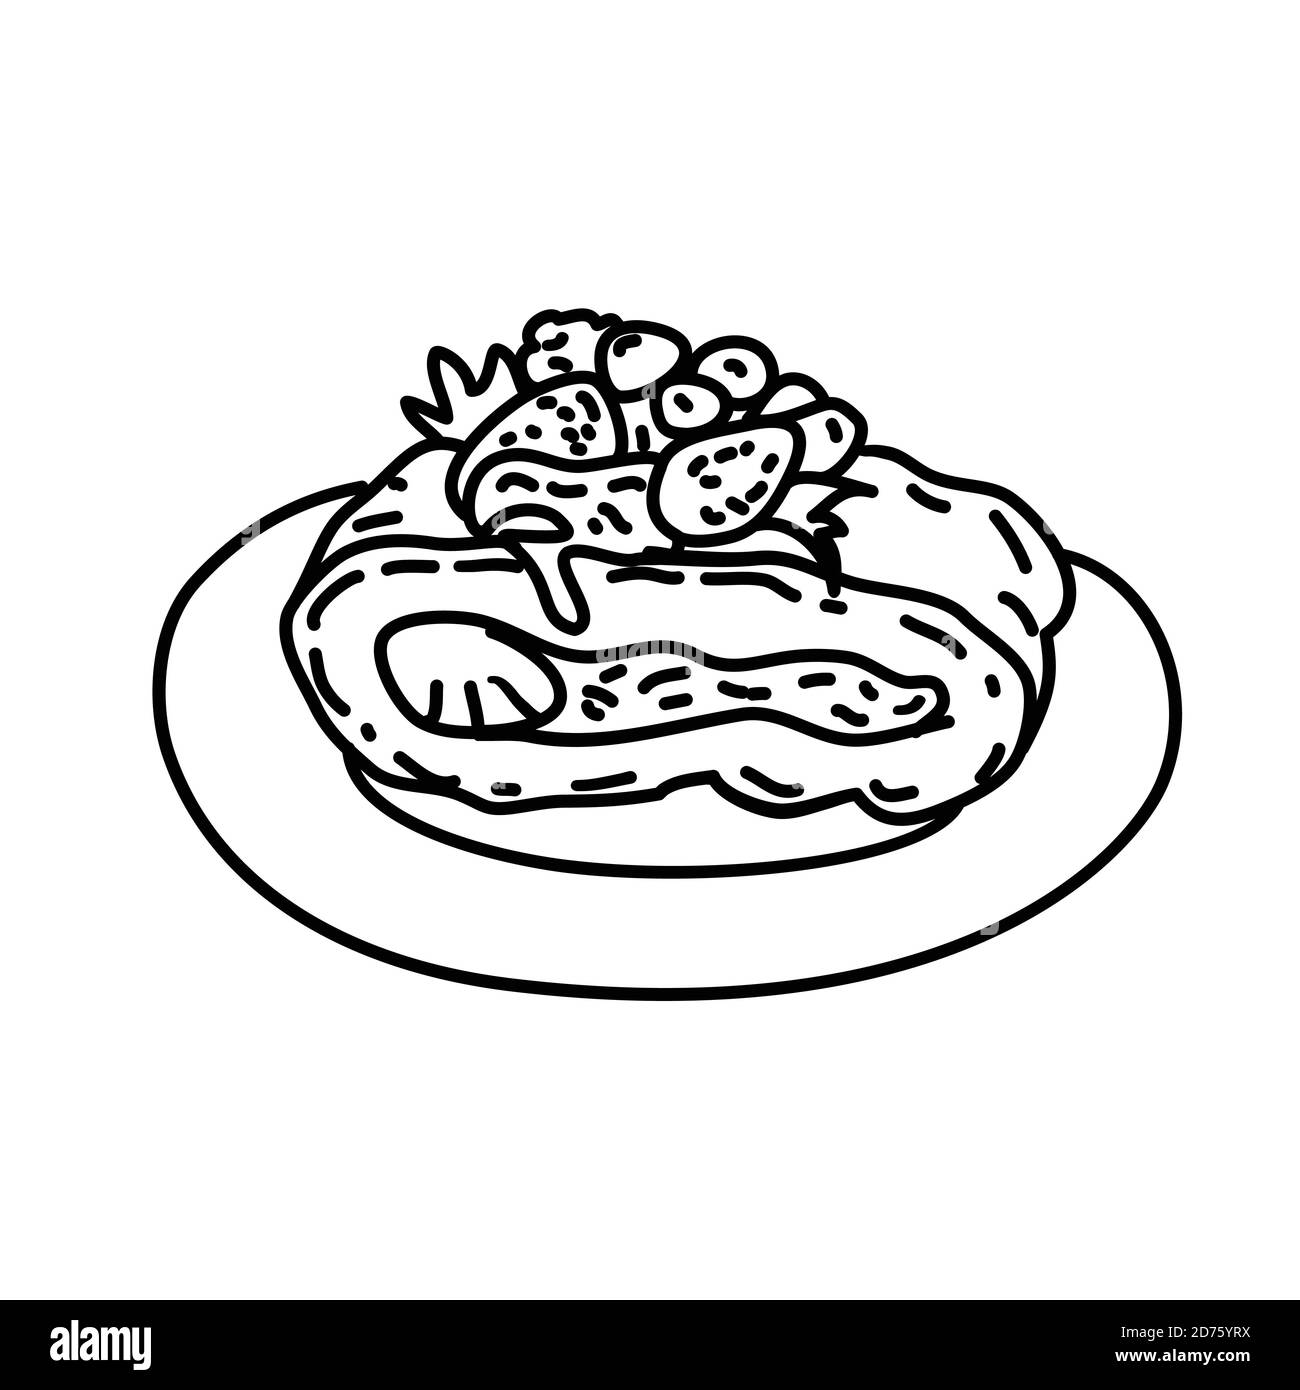 Cake Icon. Doddle Hand Drawn or Black Outline Icon Style Stock Vector